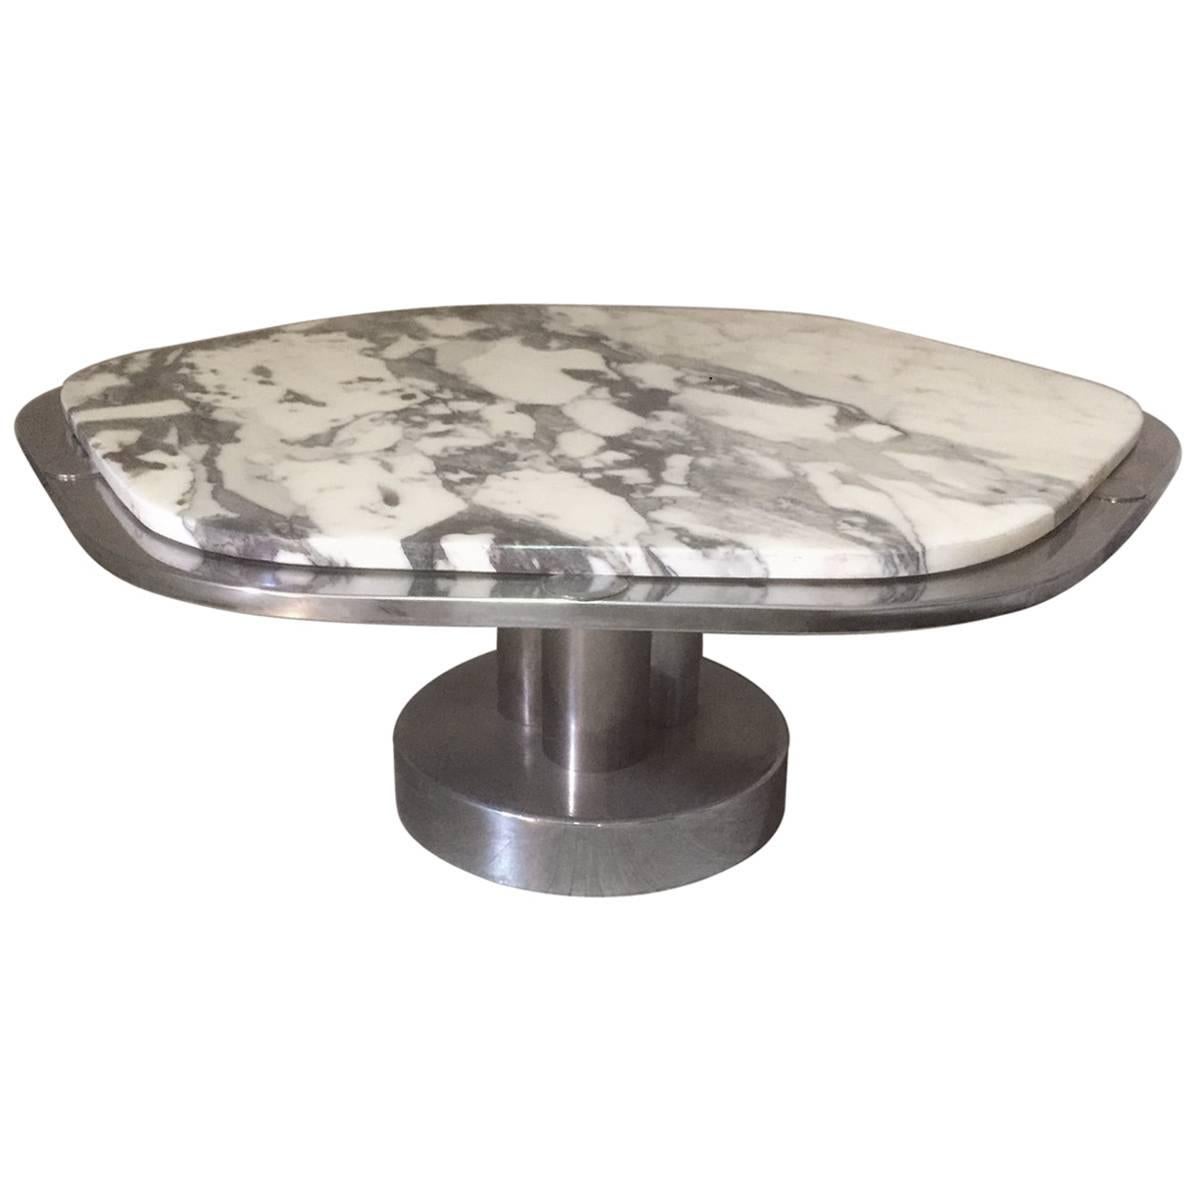 Italian Marble and Chromed Design Coffee Table, 1970s